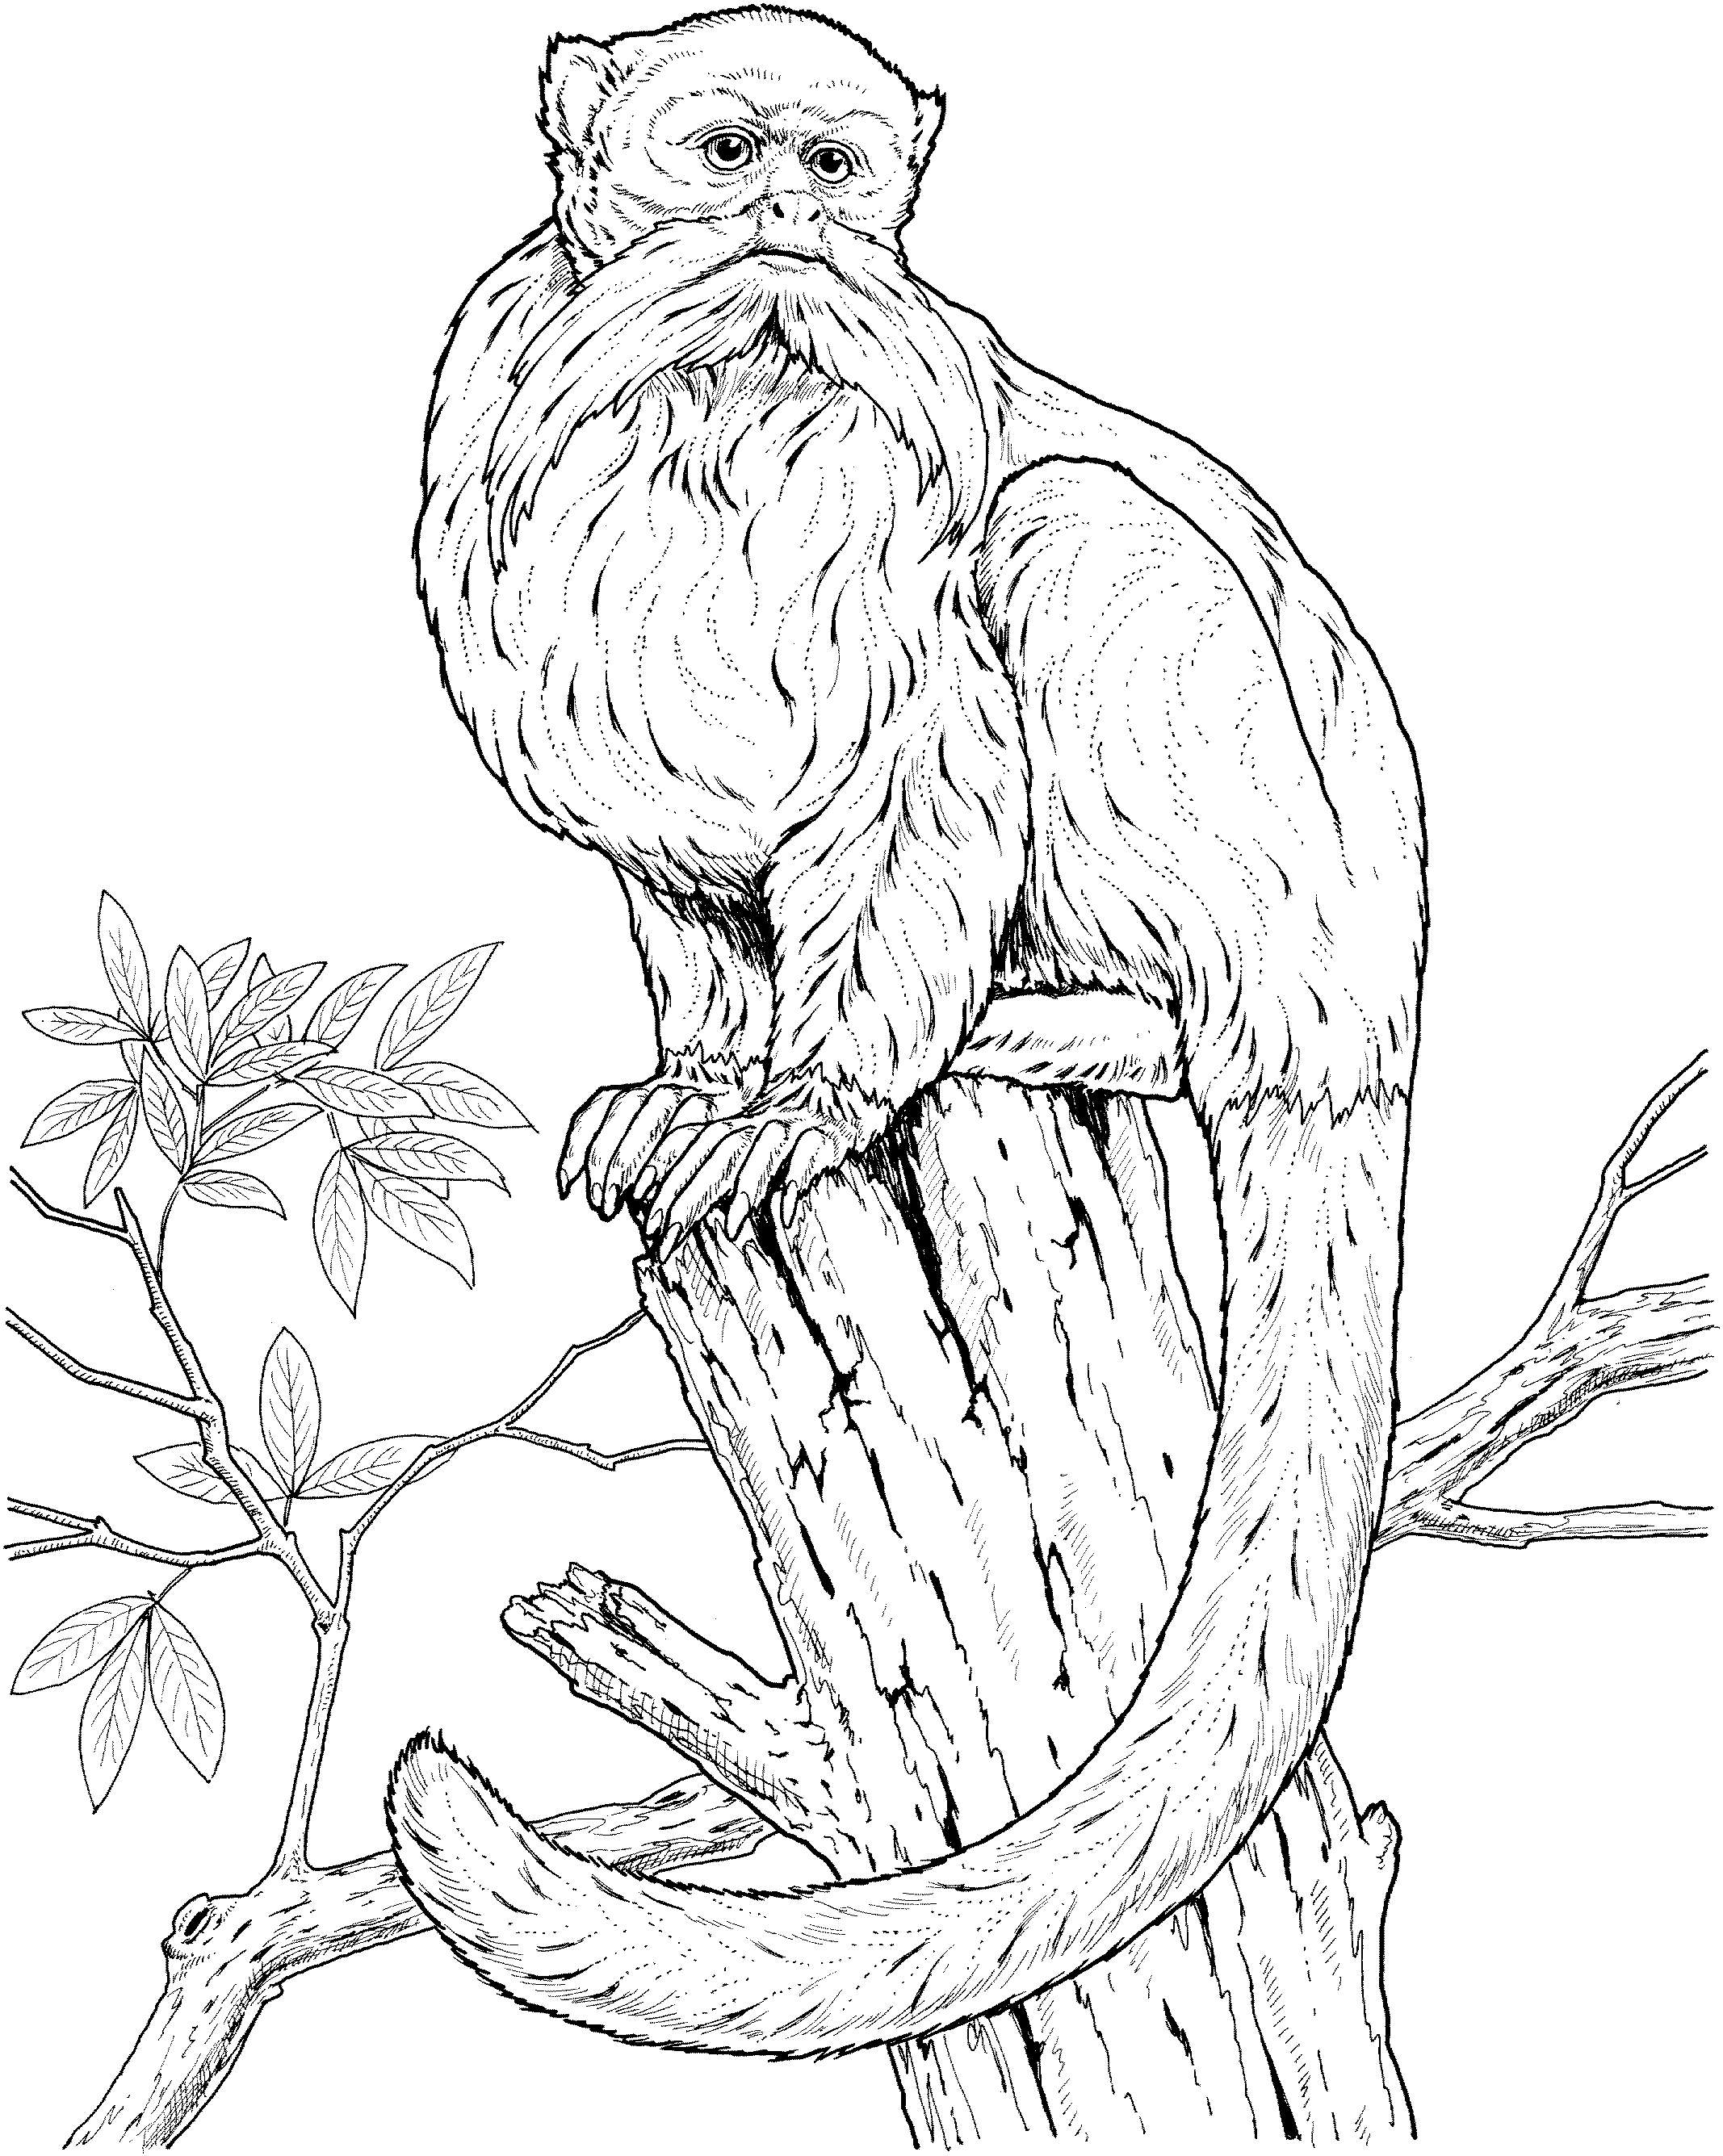 Coloring Pages Of Monkeys Free Monkey Coloring Pages